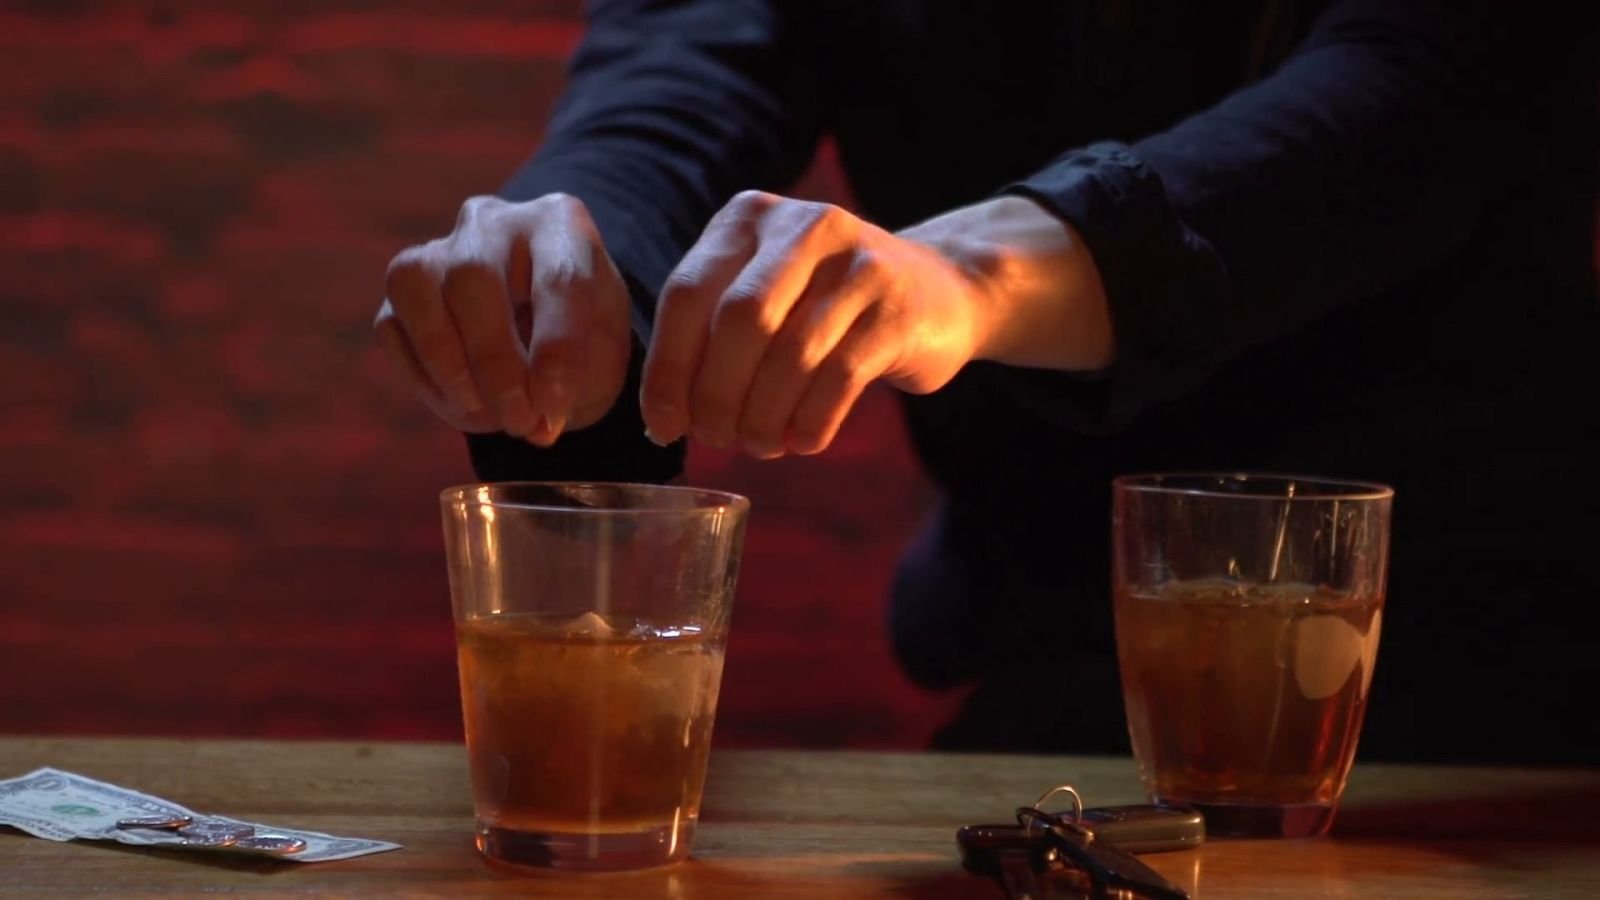 The Science of Preventing Date Rape